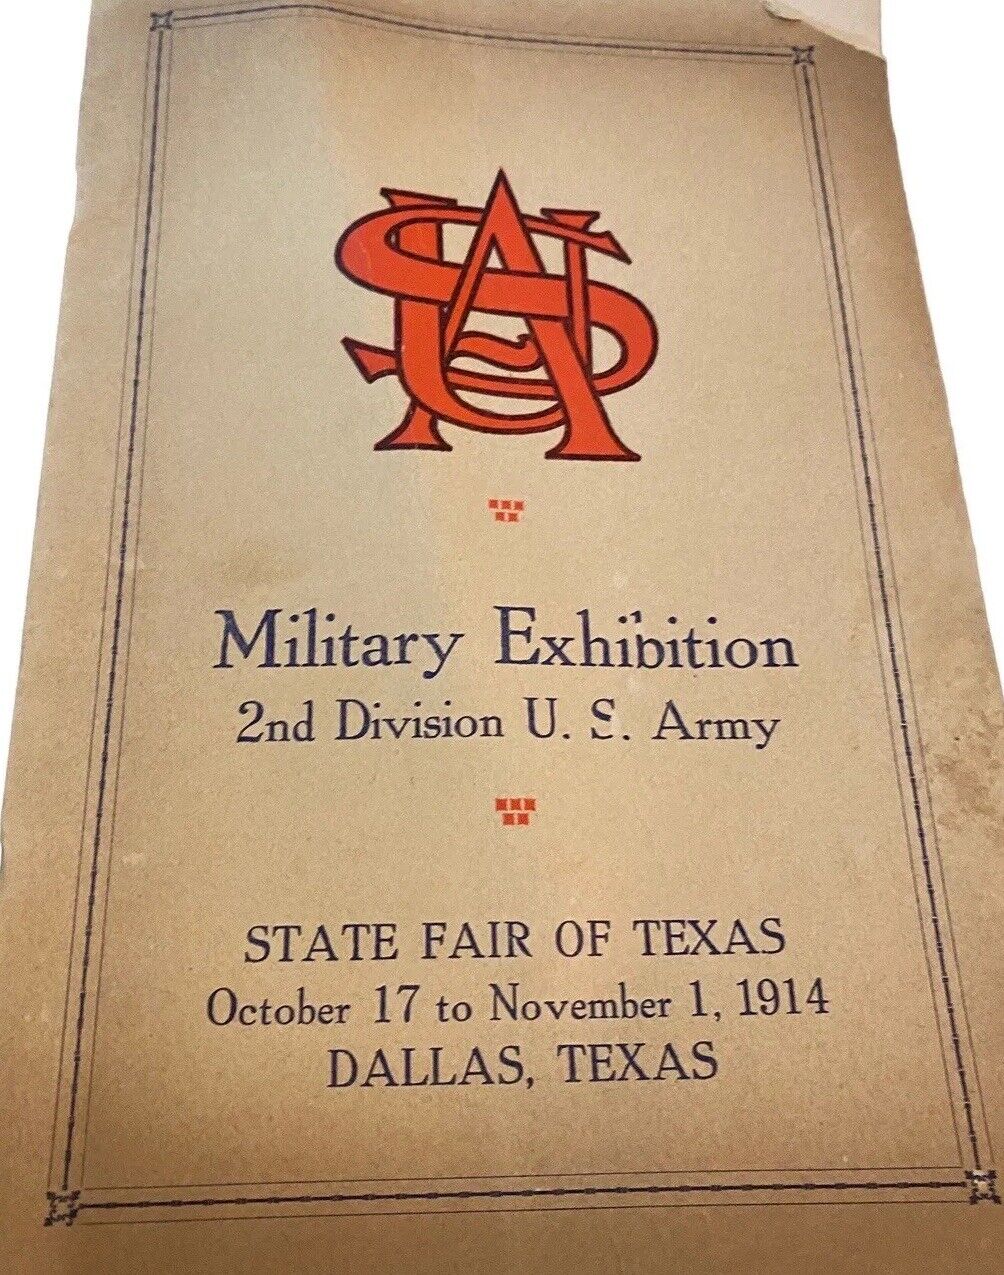 Vintage State Fair of Texas 1914 United States Military Army Exhibition Program